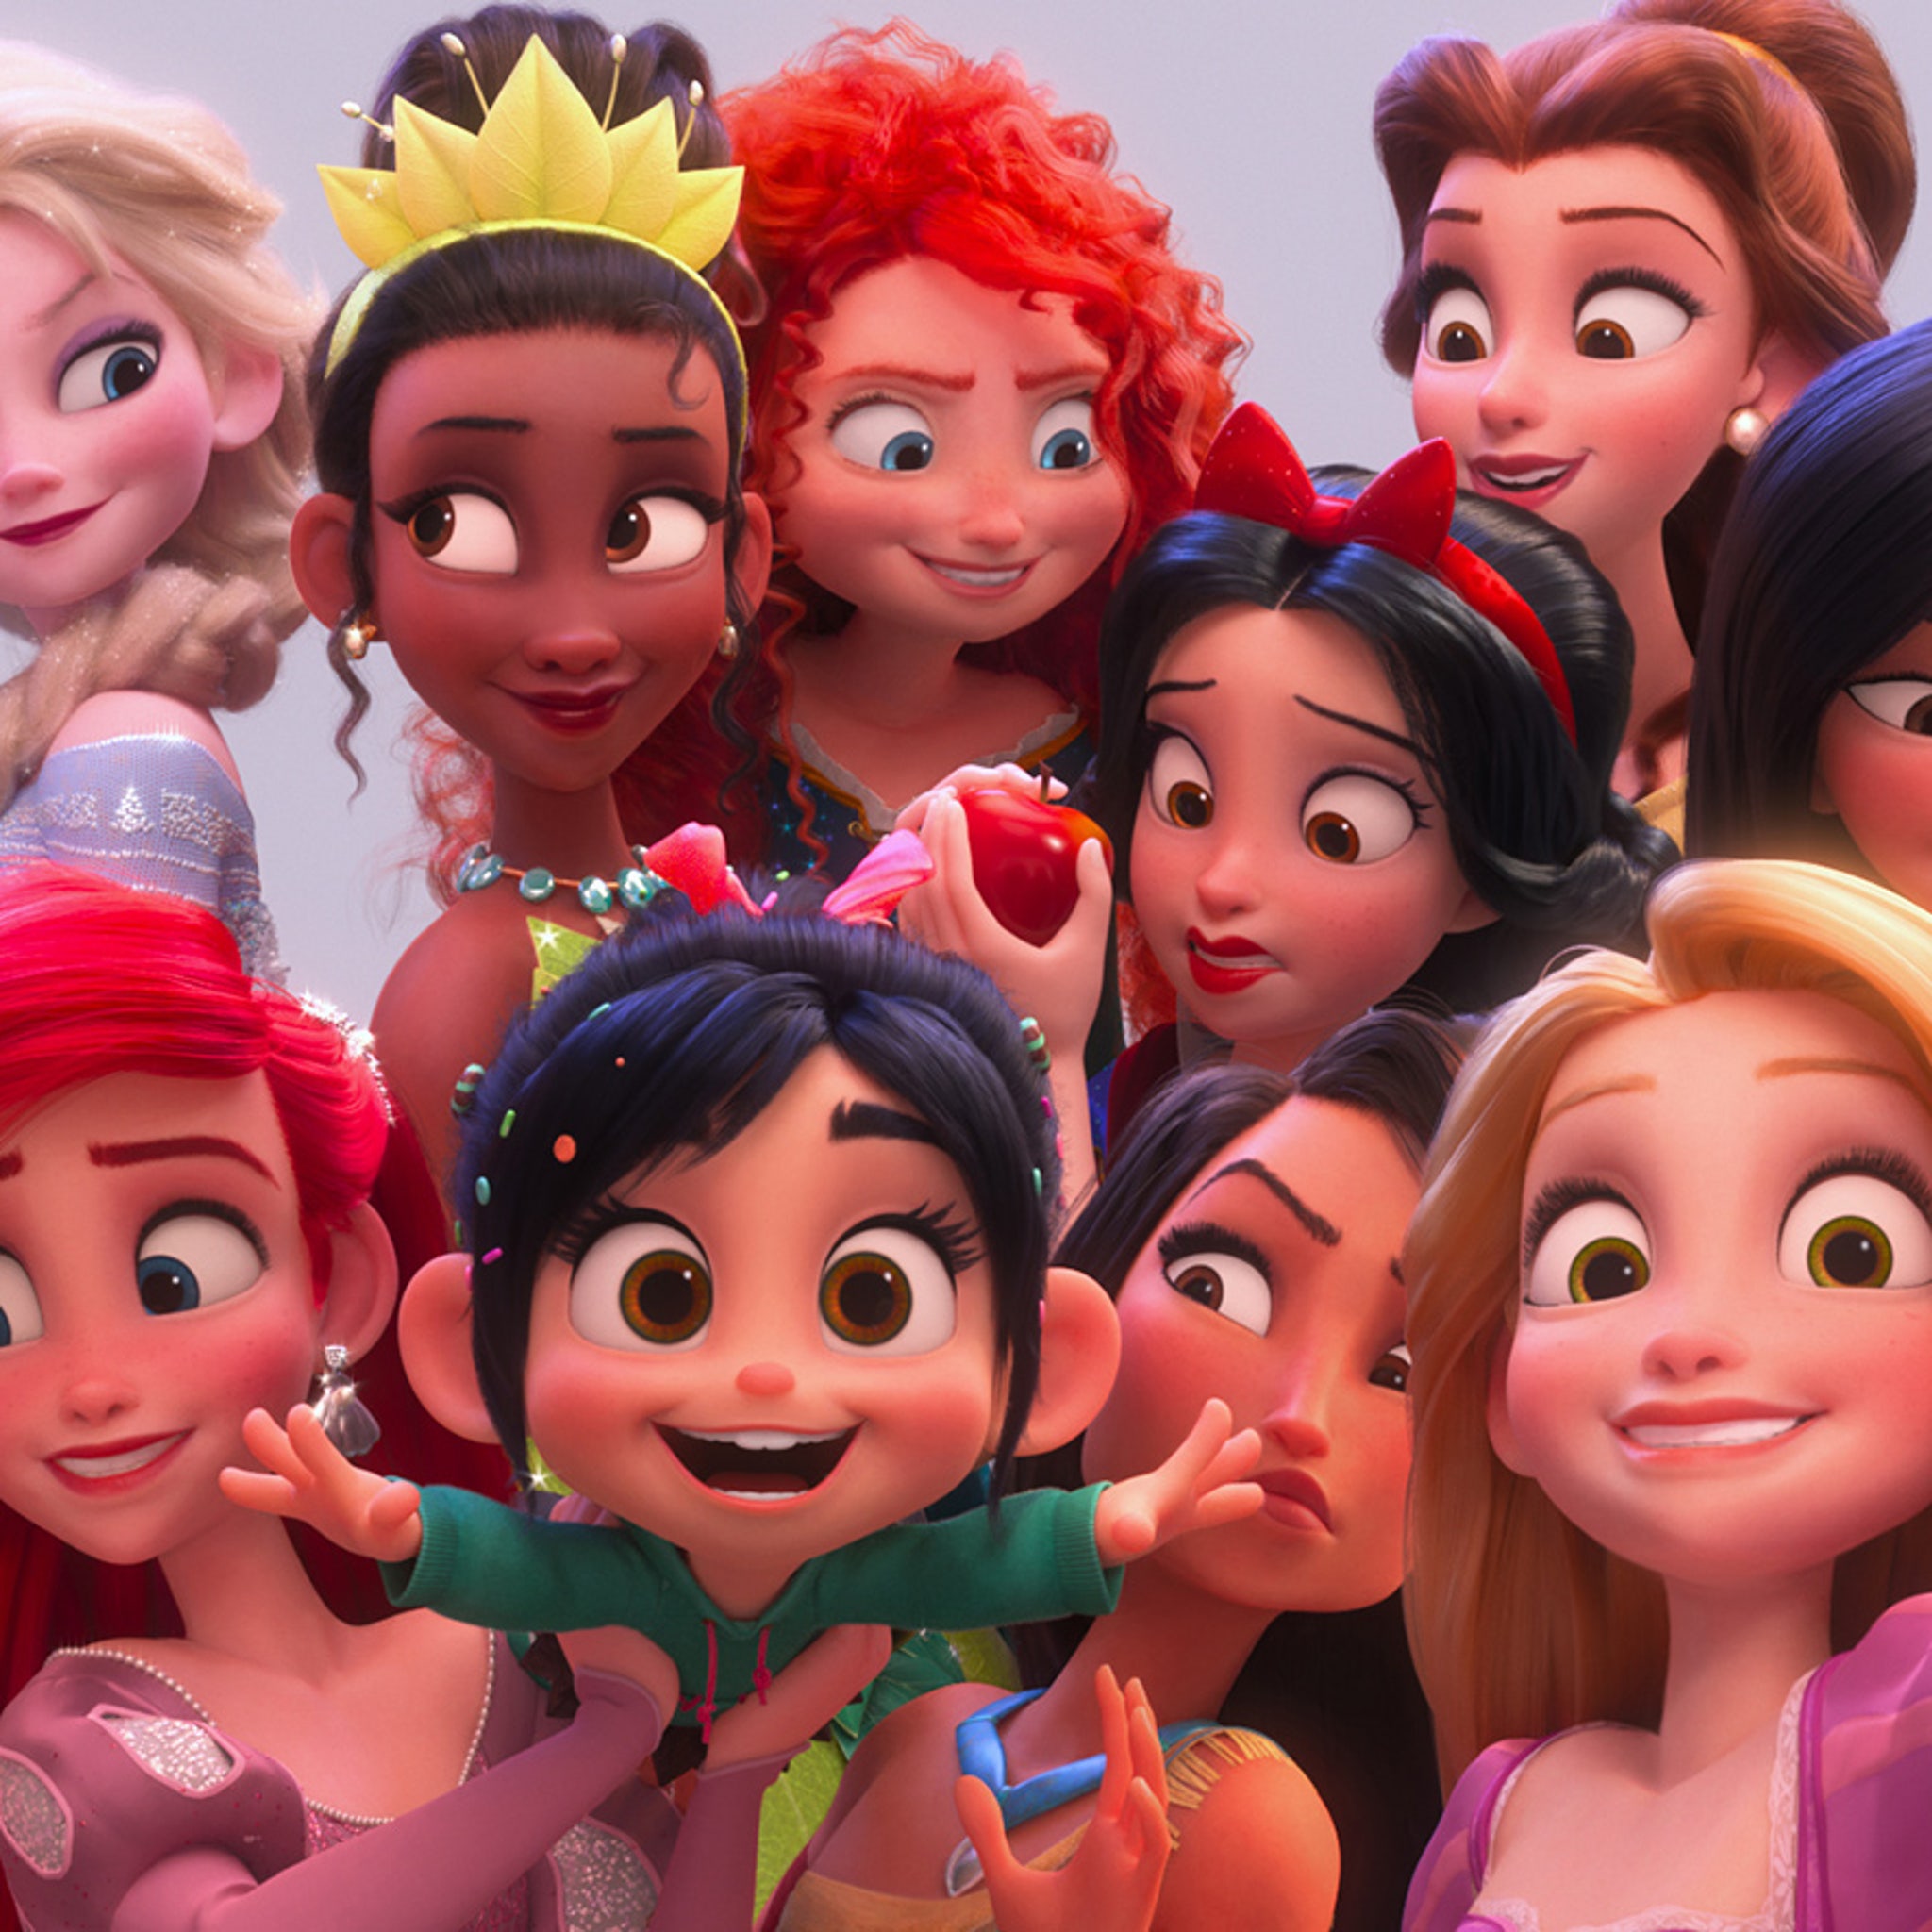 Sarah Silverman Gets Her Princess Moment In 'Ralph Breaks the Internet' as Disney's  Animated Heroines Get a Makeover